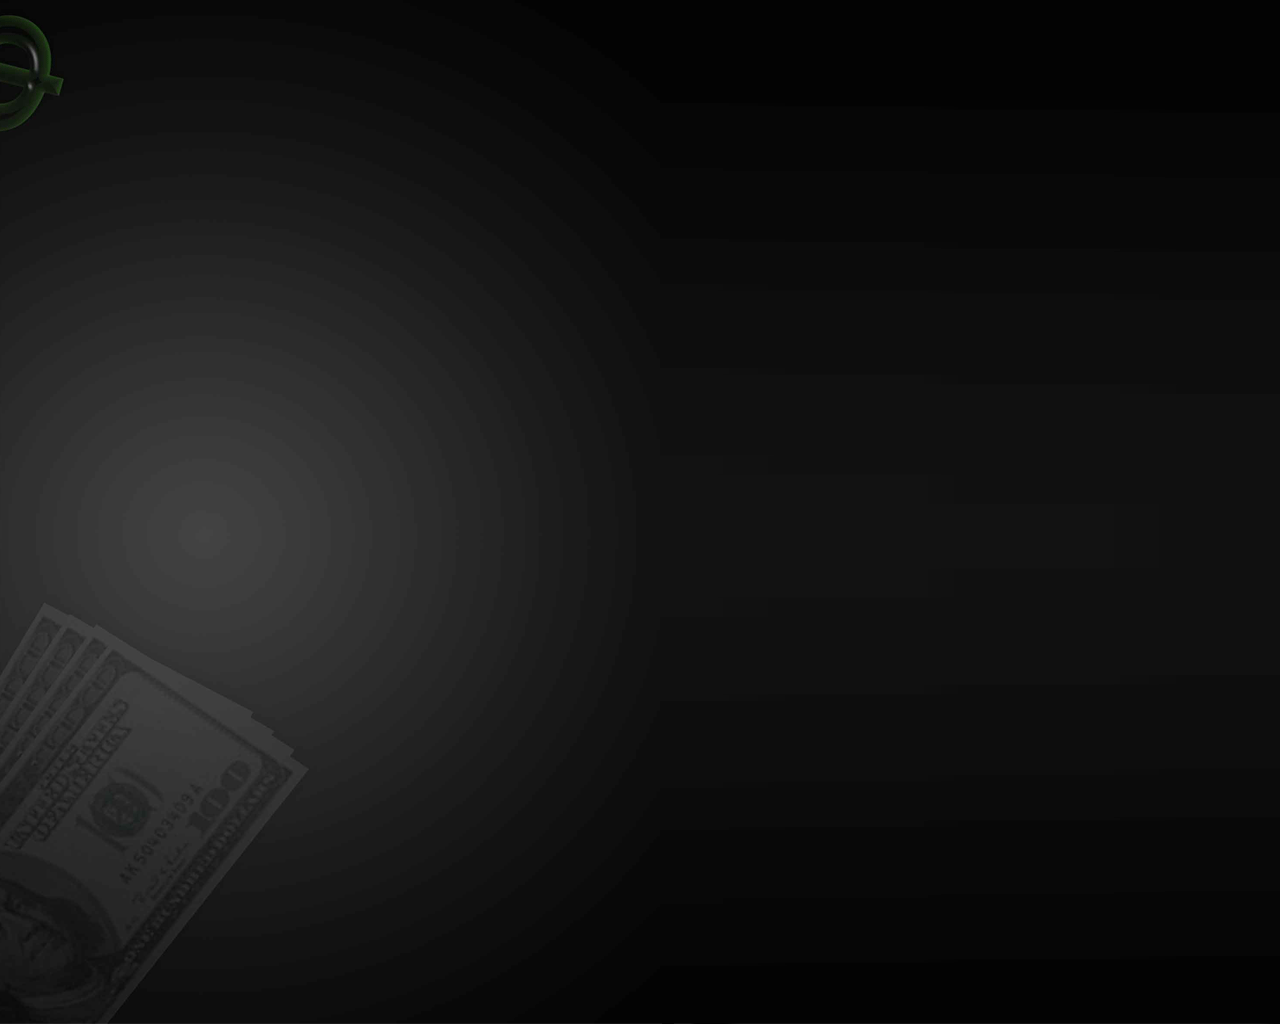 Money On Black Abstract Background For PowerPoint and Finance PPT